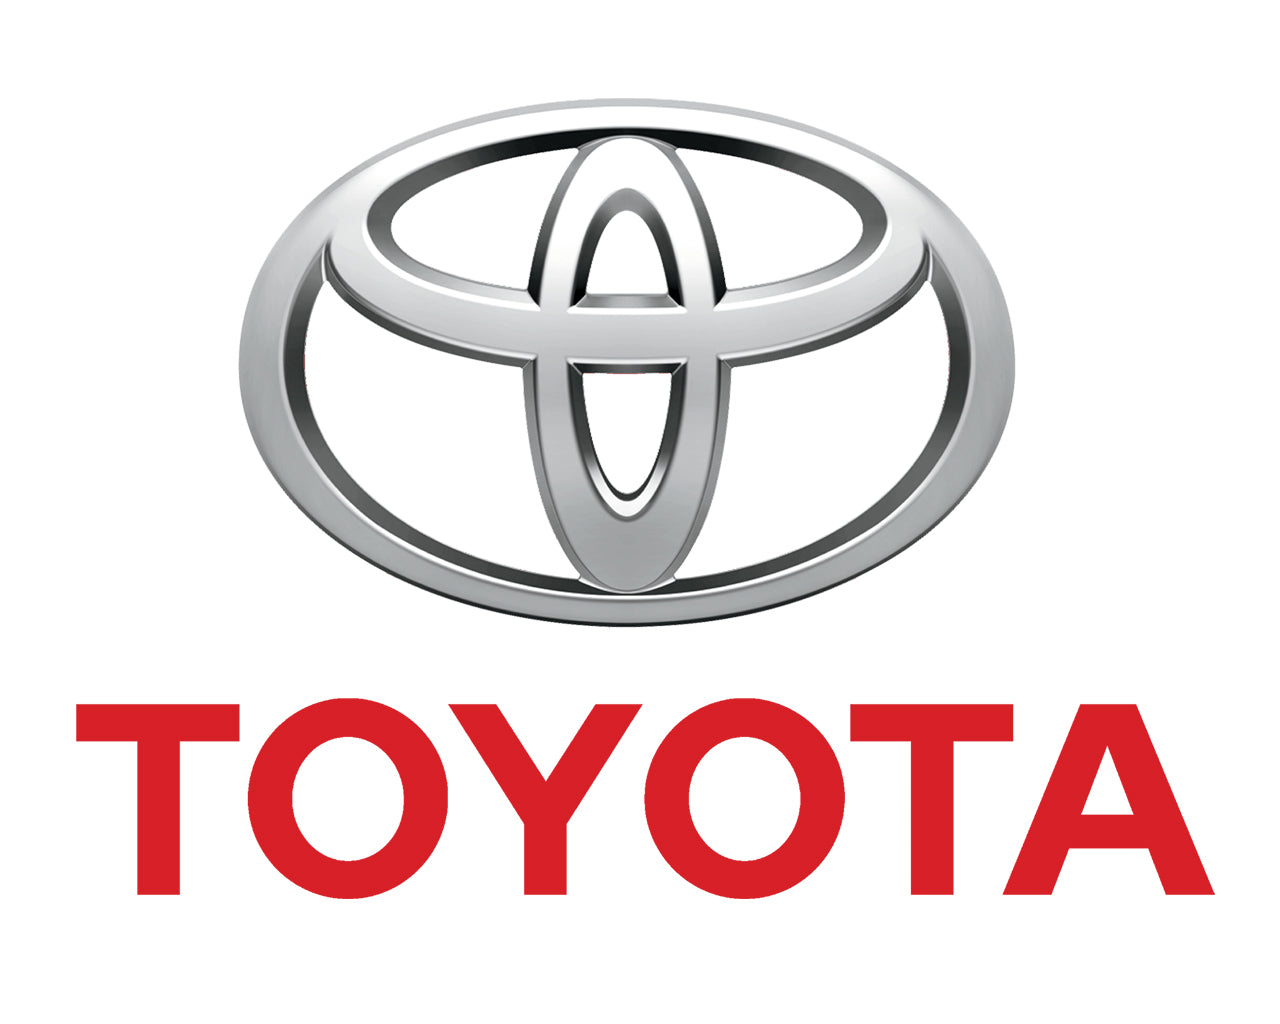 Toyota symbol above red Toyota word on white background